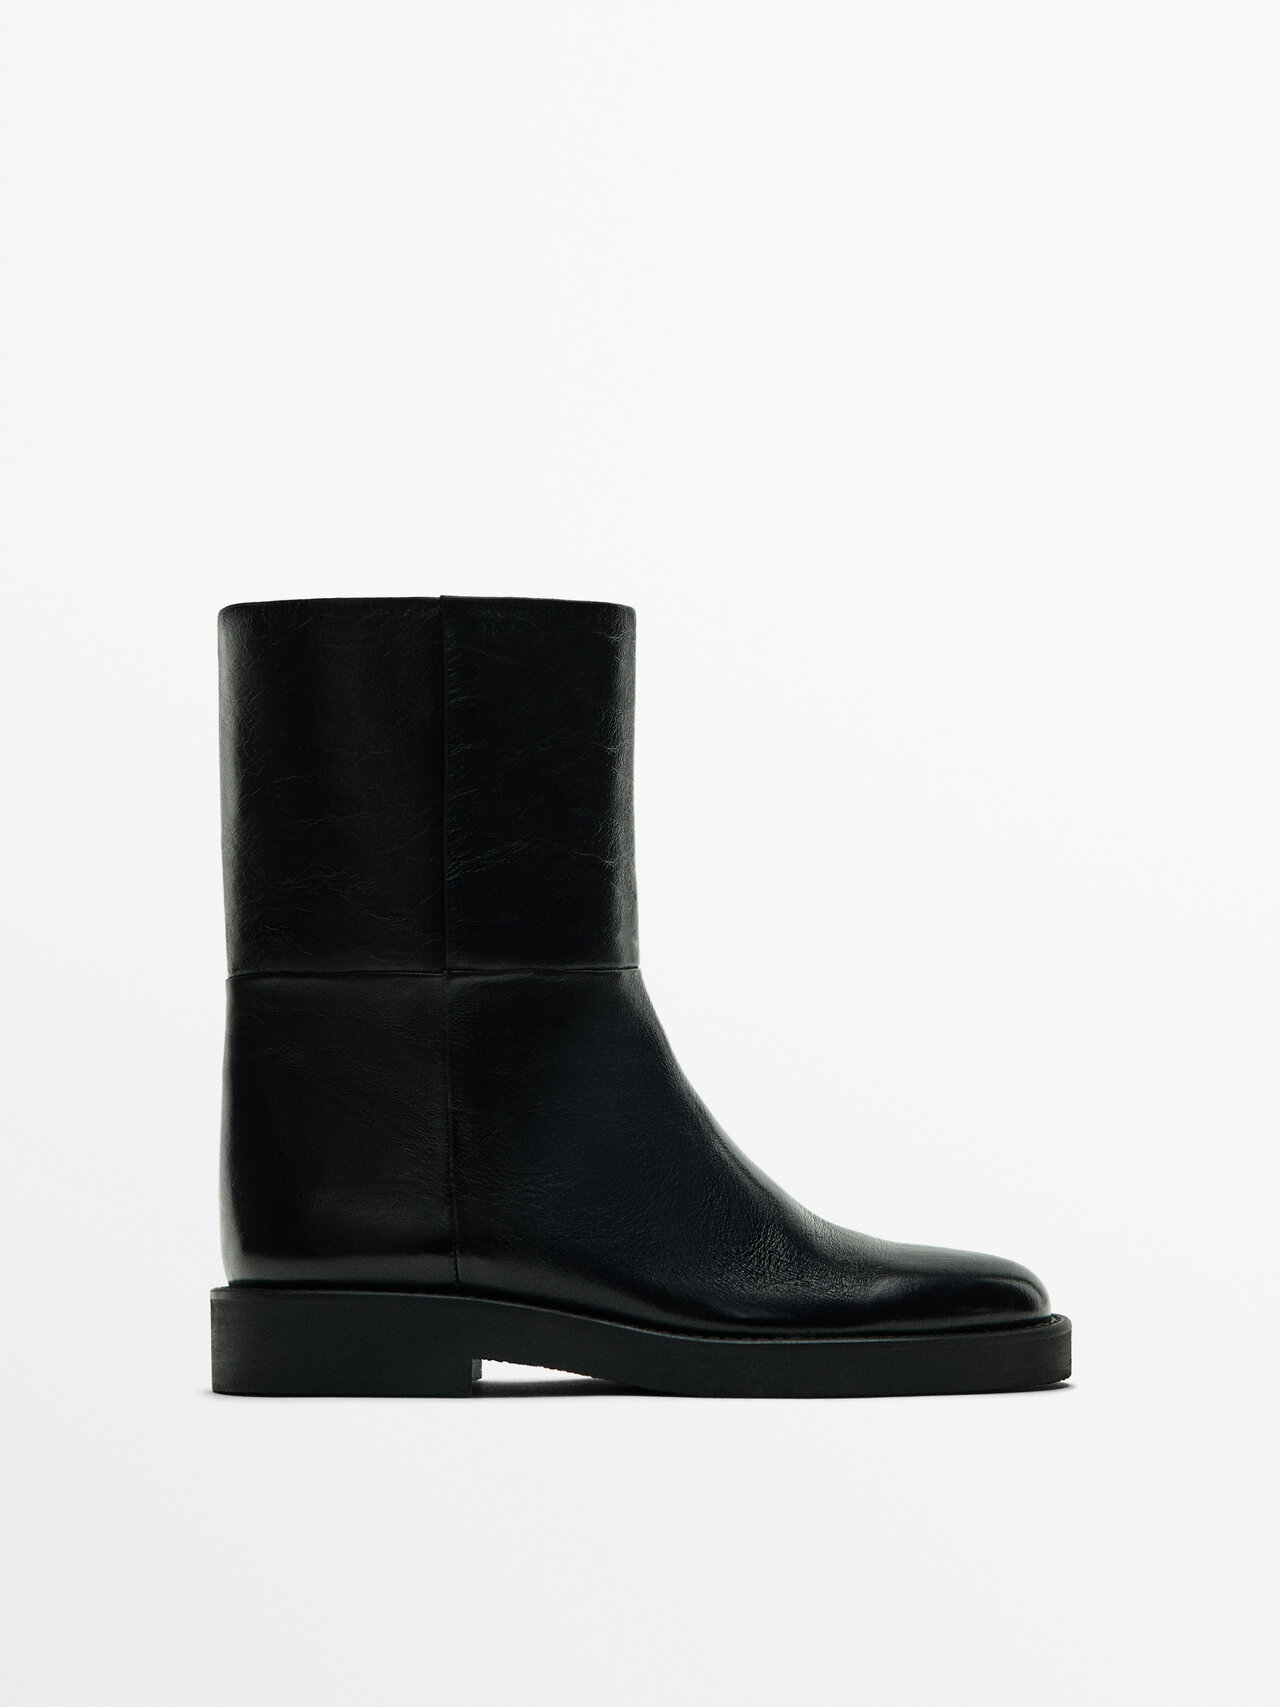 Massimo Dutti Shiny Leather Ankle Boots In Black